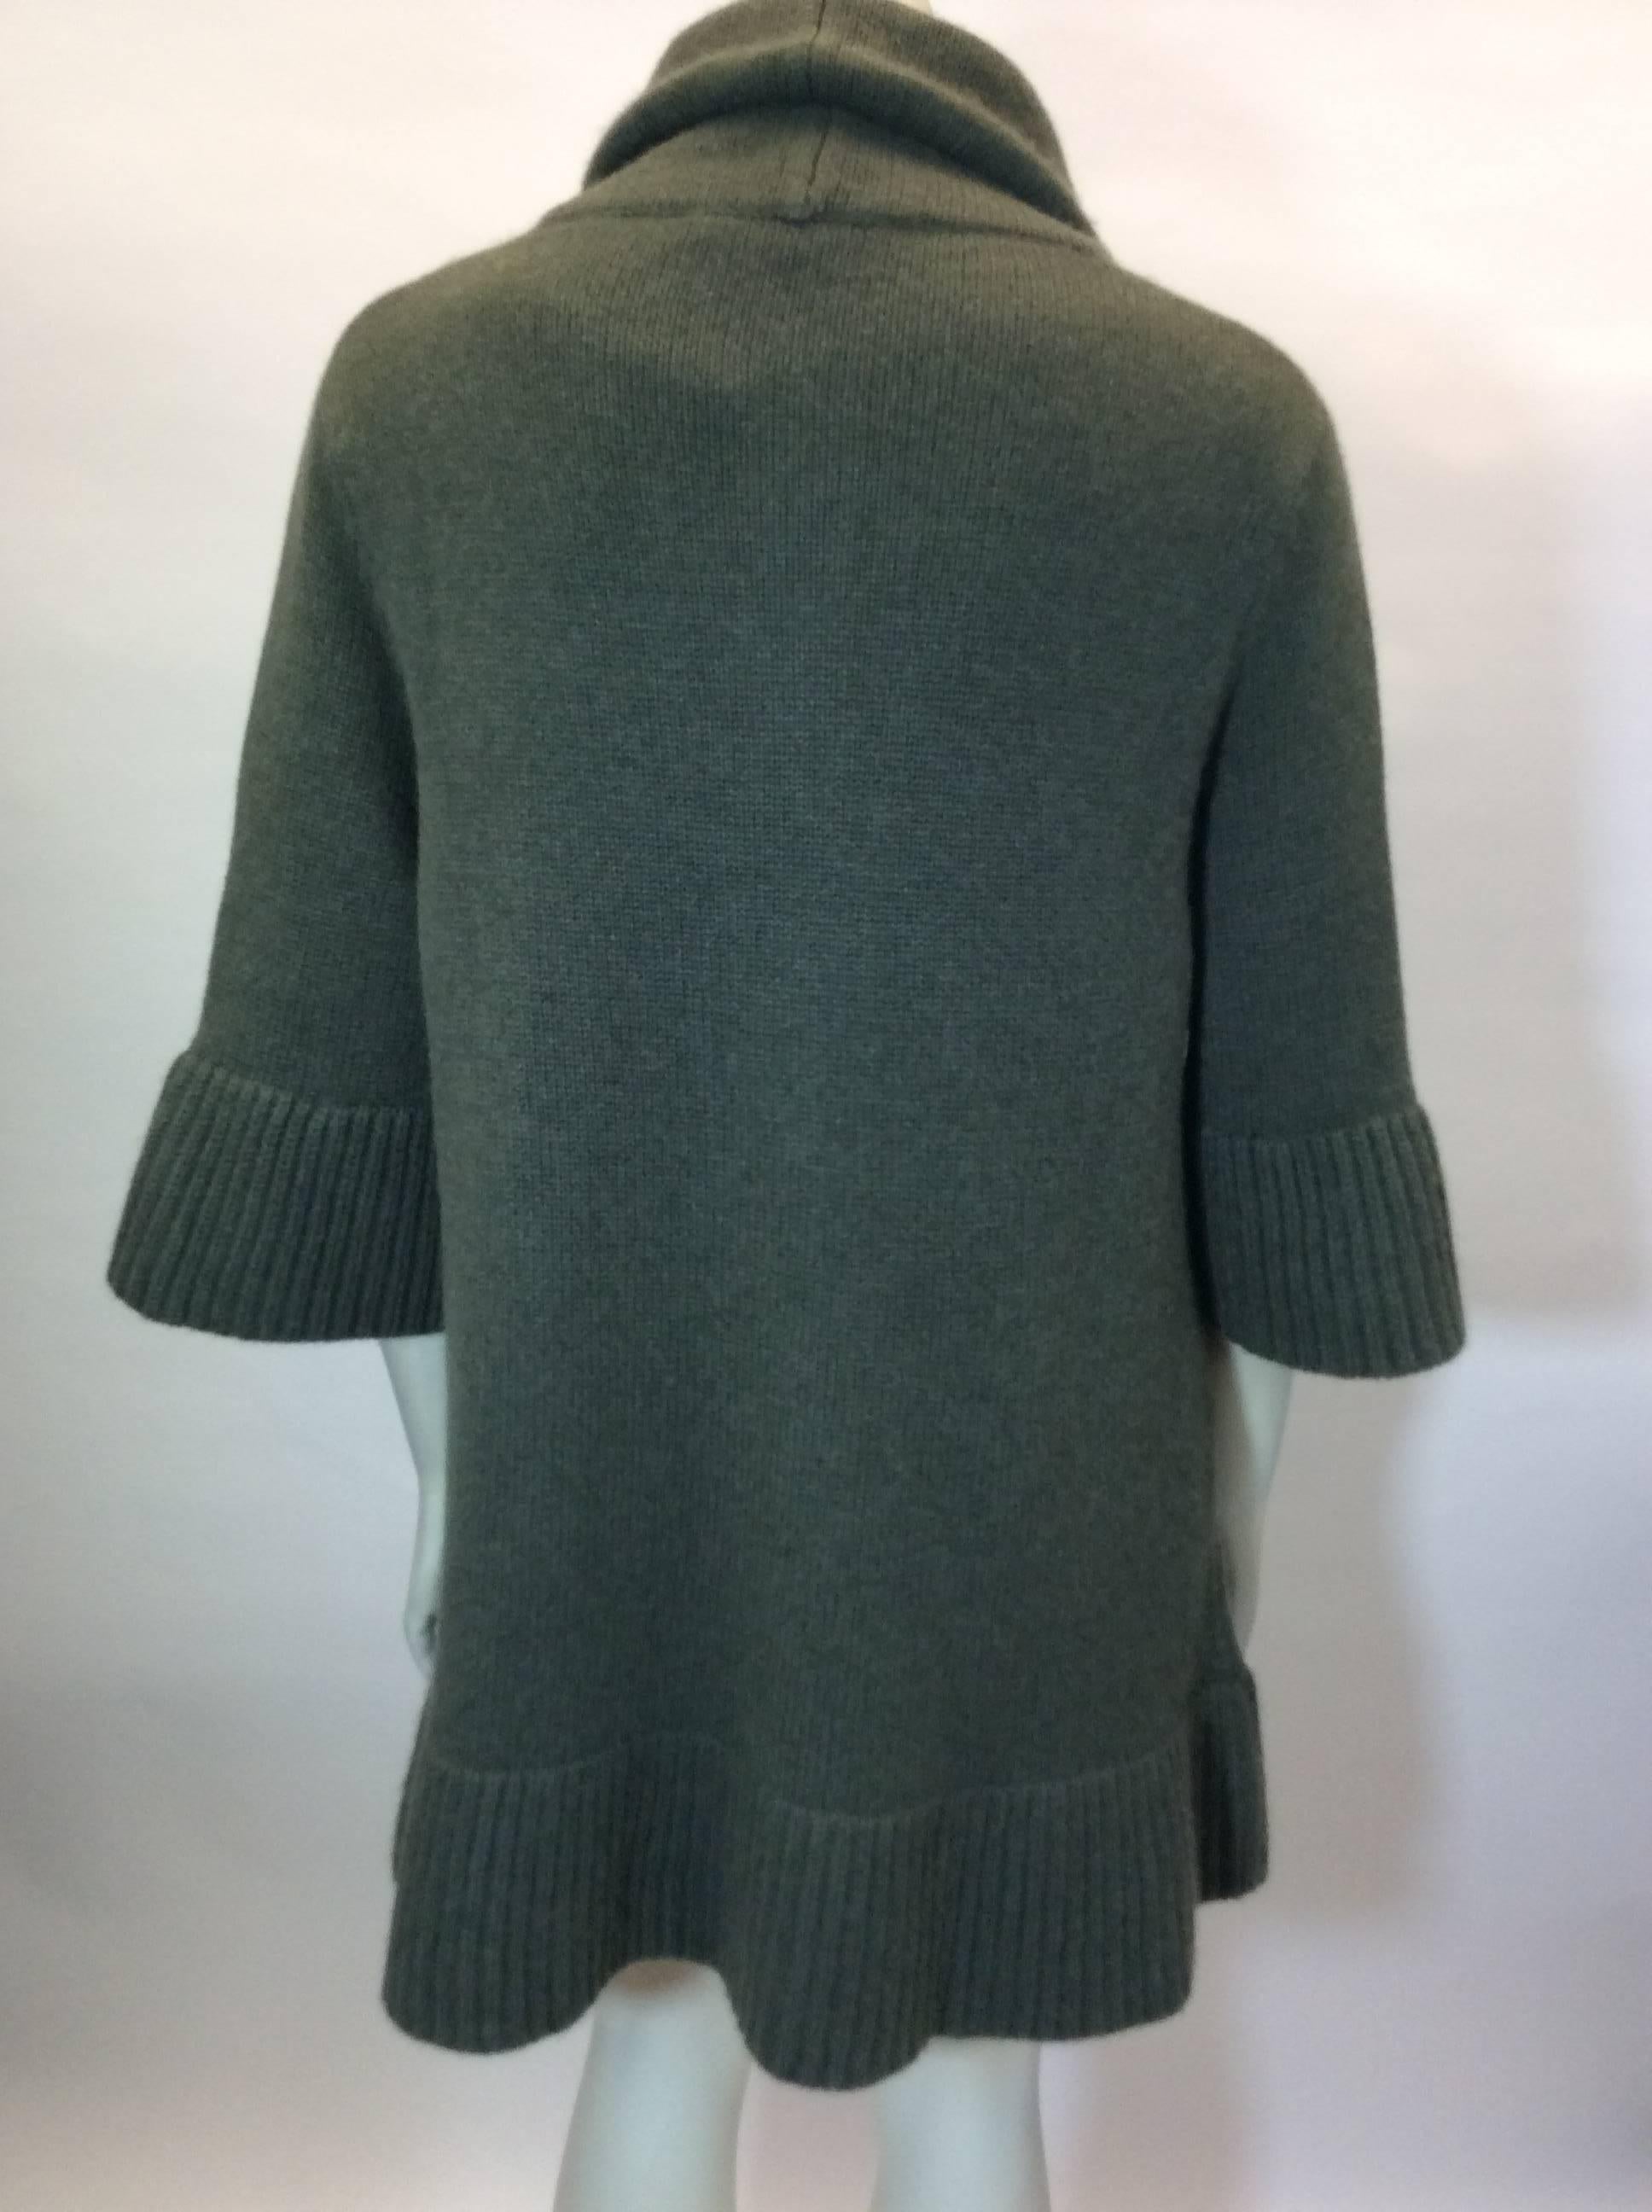 Rani Arabella Olive Cashmere Cardigan with Detachable Sleeves In New Condition For Sale In Narberth, PA